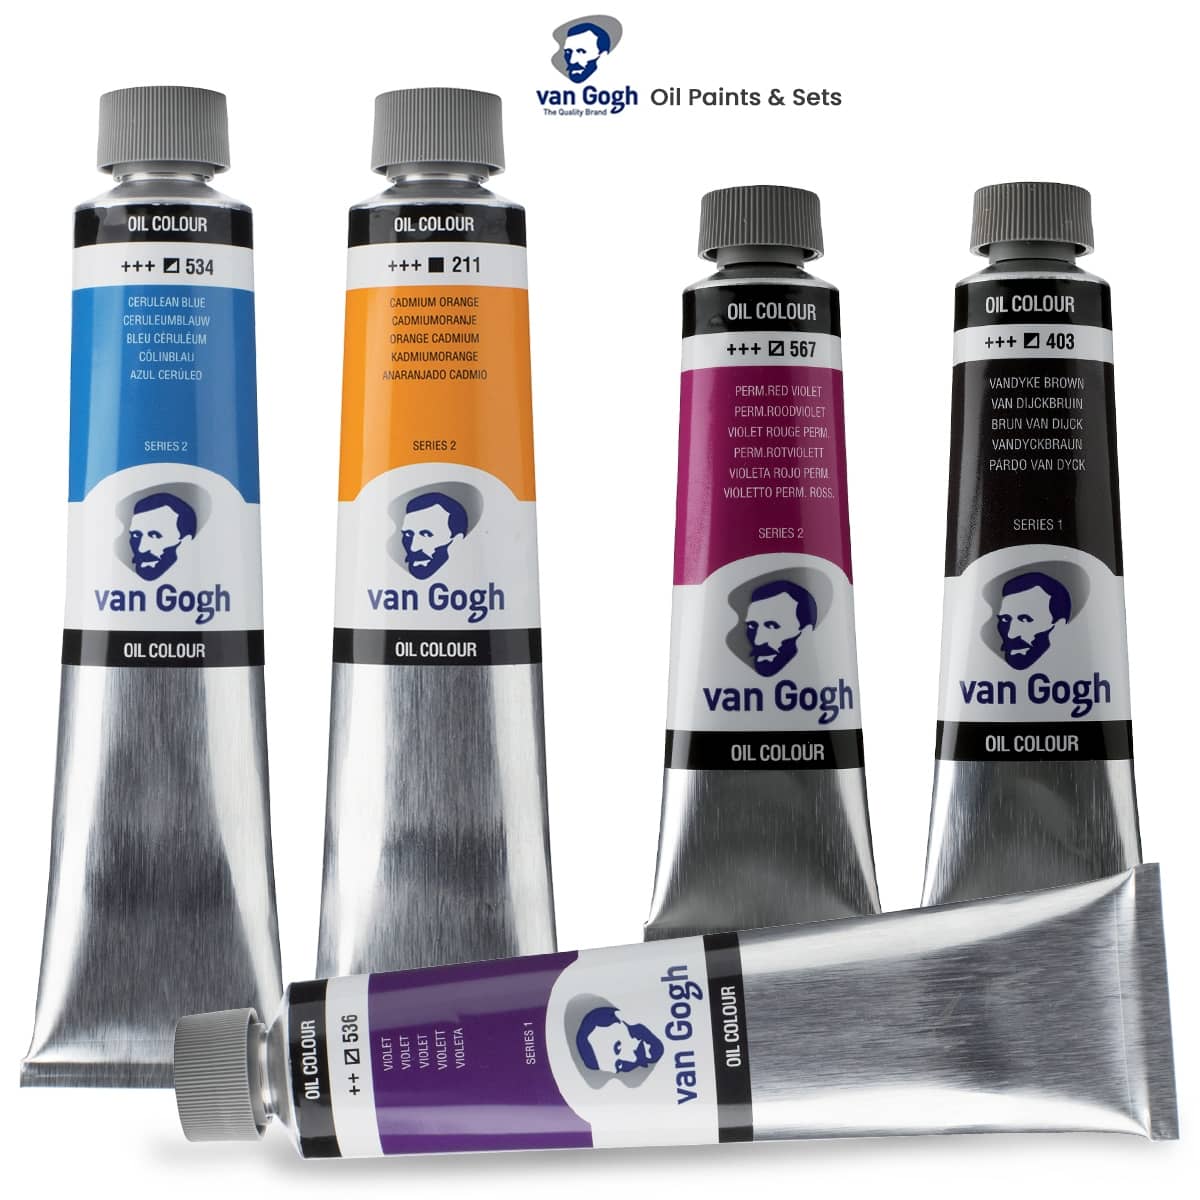 Introducing our new ranges of oil paints - Michael Harding and Daler Rowney  Georgian Oil Colour